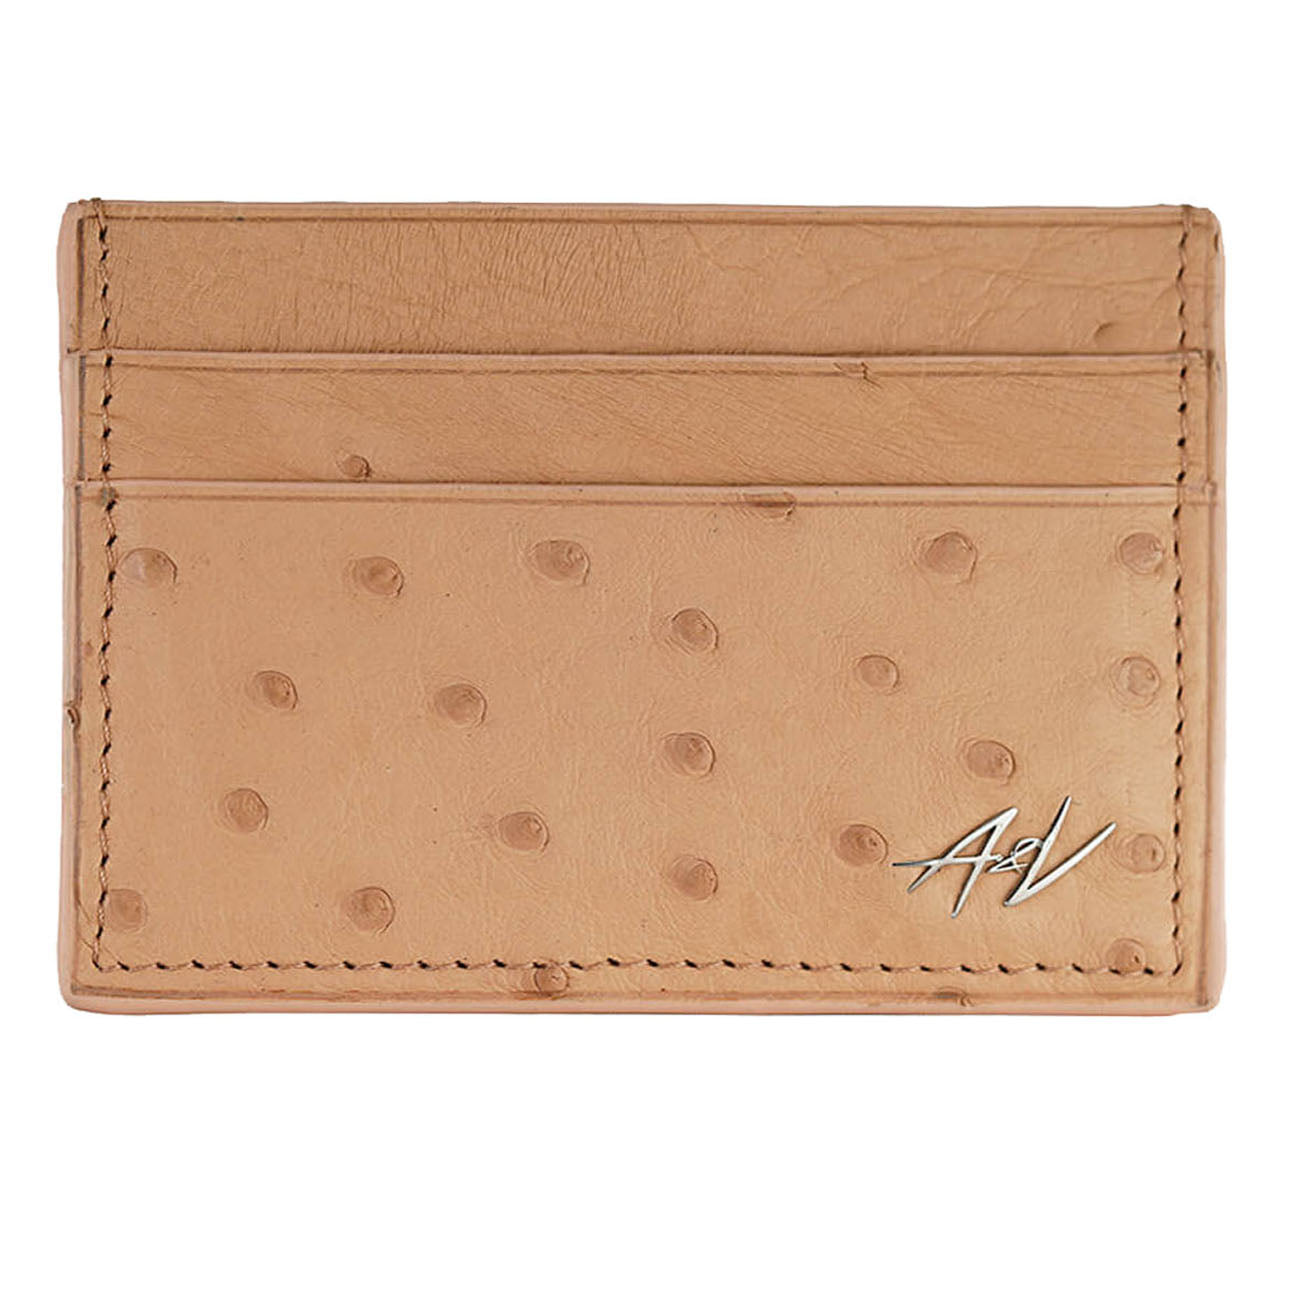 CARD HOLDER OSTRICH LEATHER TUCSON